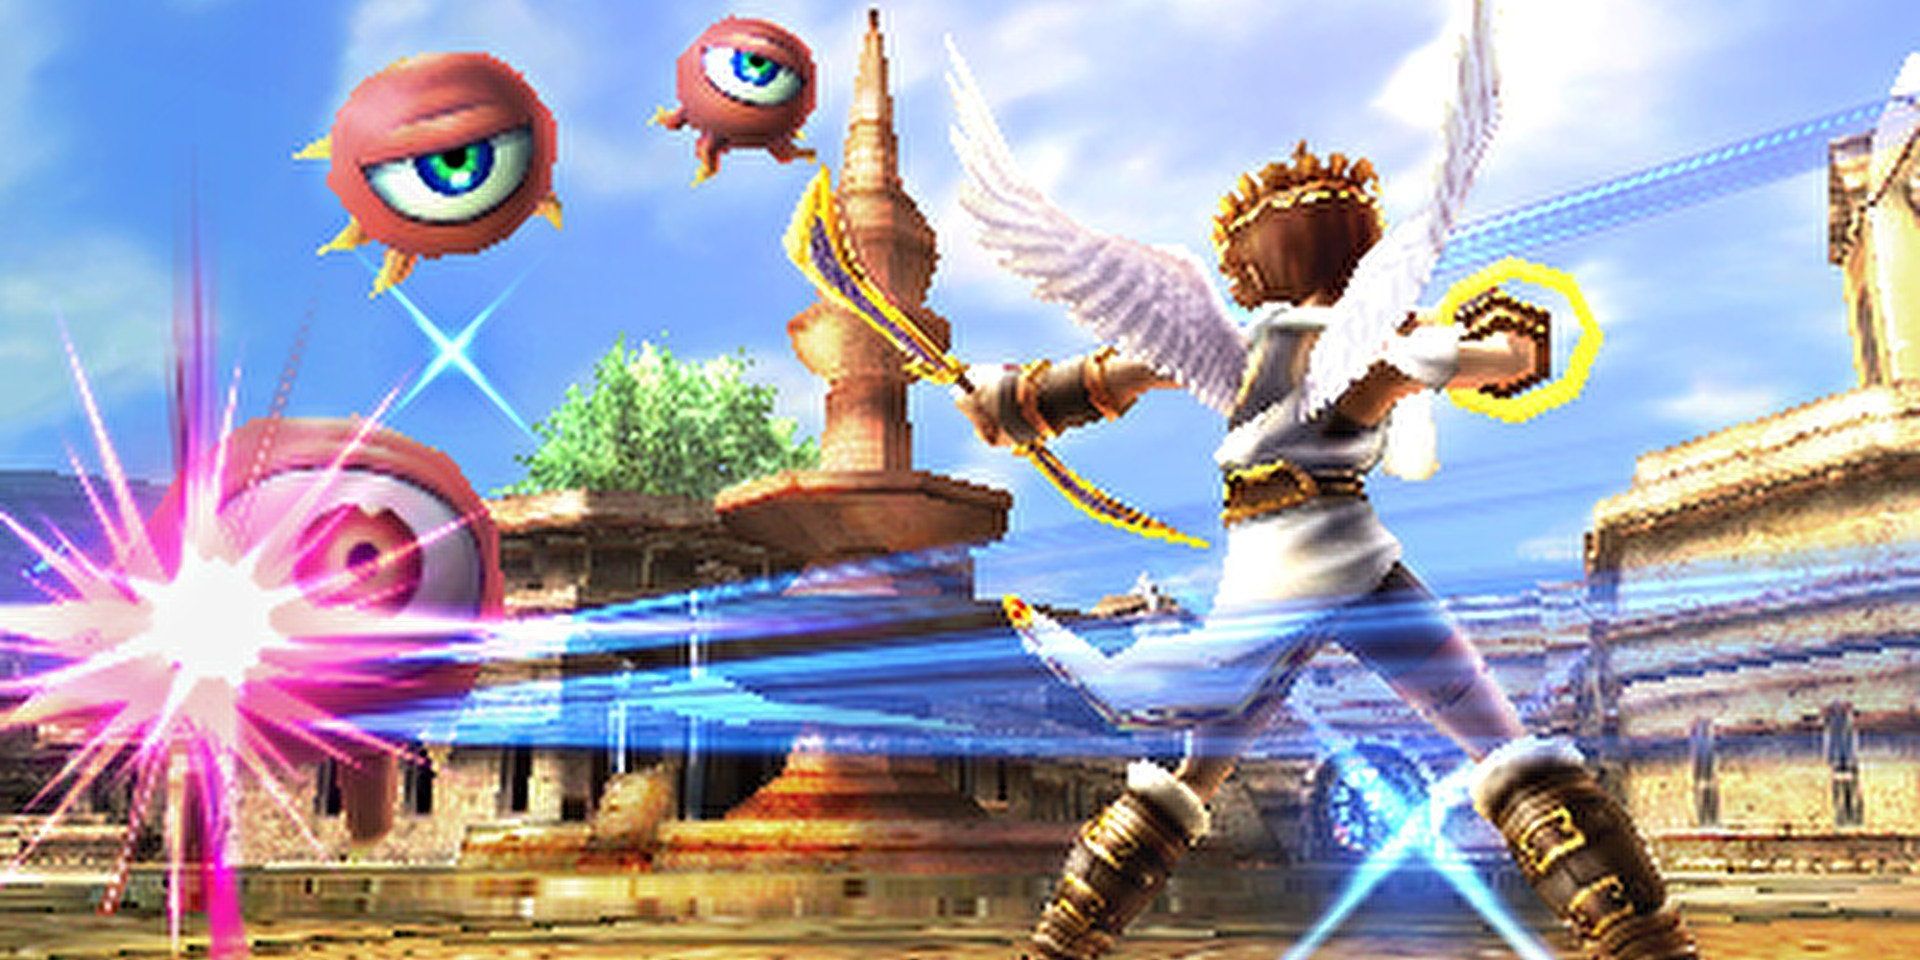 Pit launches an arrow at monsters in Kid Icarus: Uprising